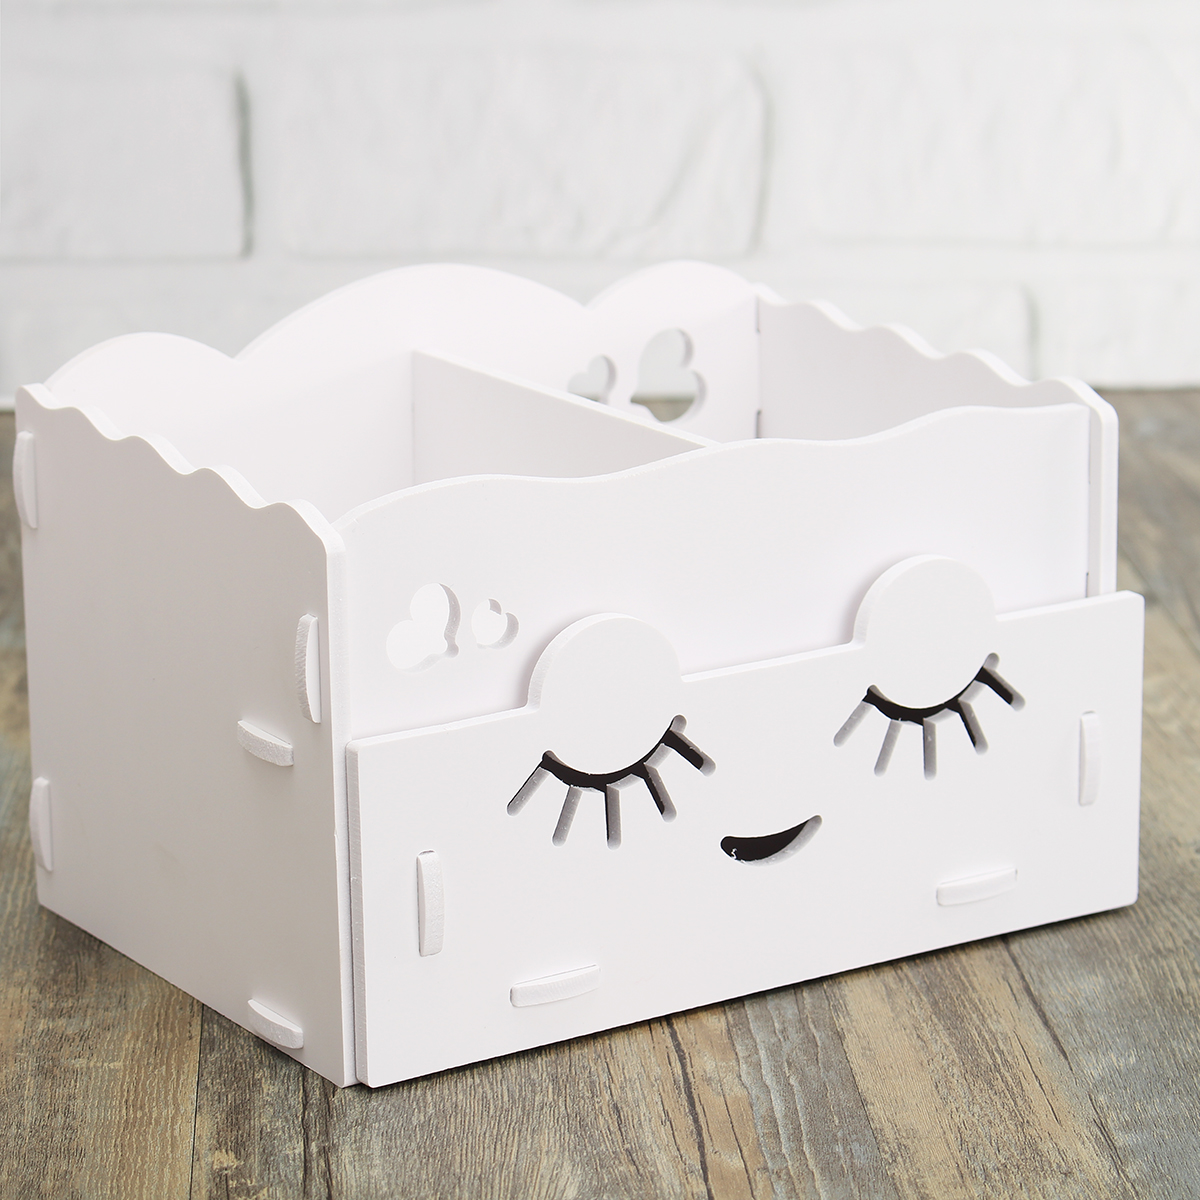 Smiling-Face-Cute-Wooden-White-Makeup-Organizer-Neat-Table-Collecting-Case-Cosmetics-Tools-1123232-5